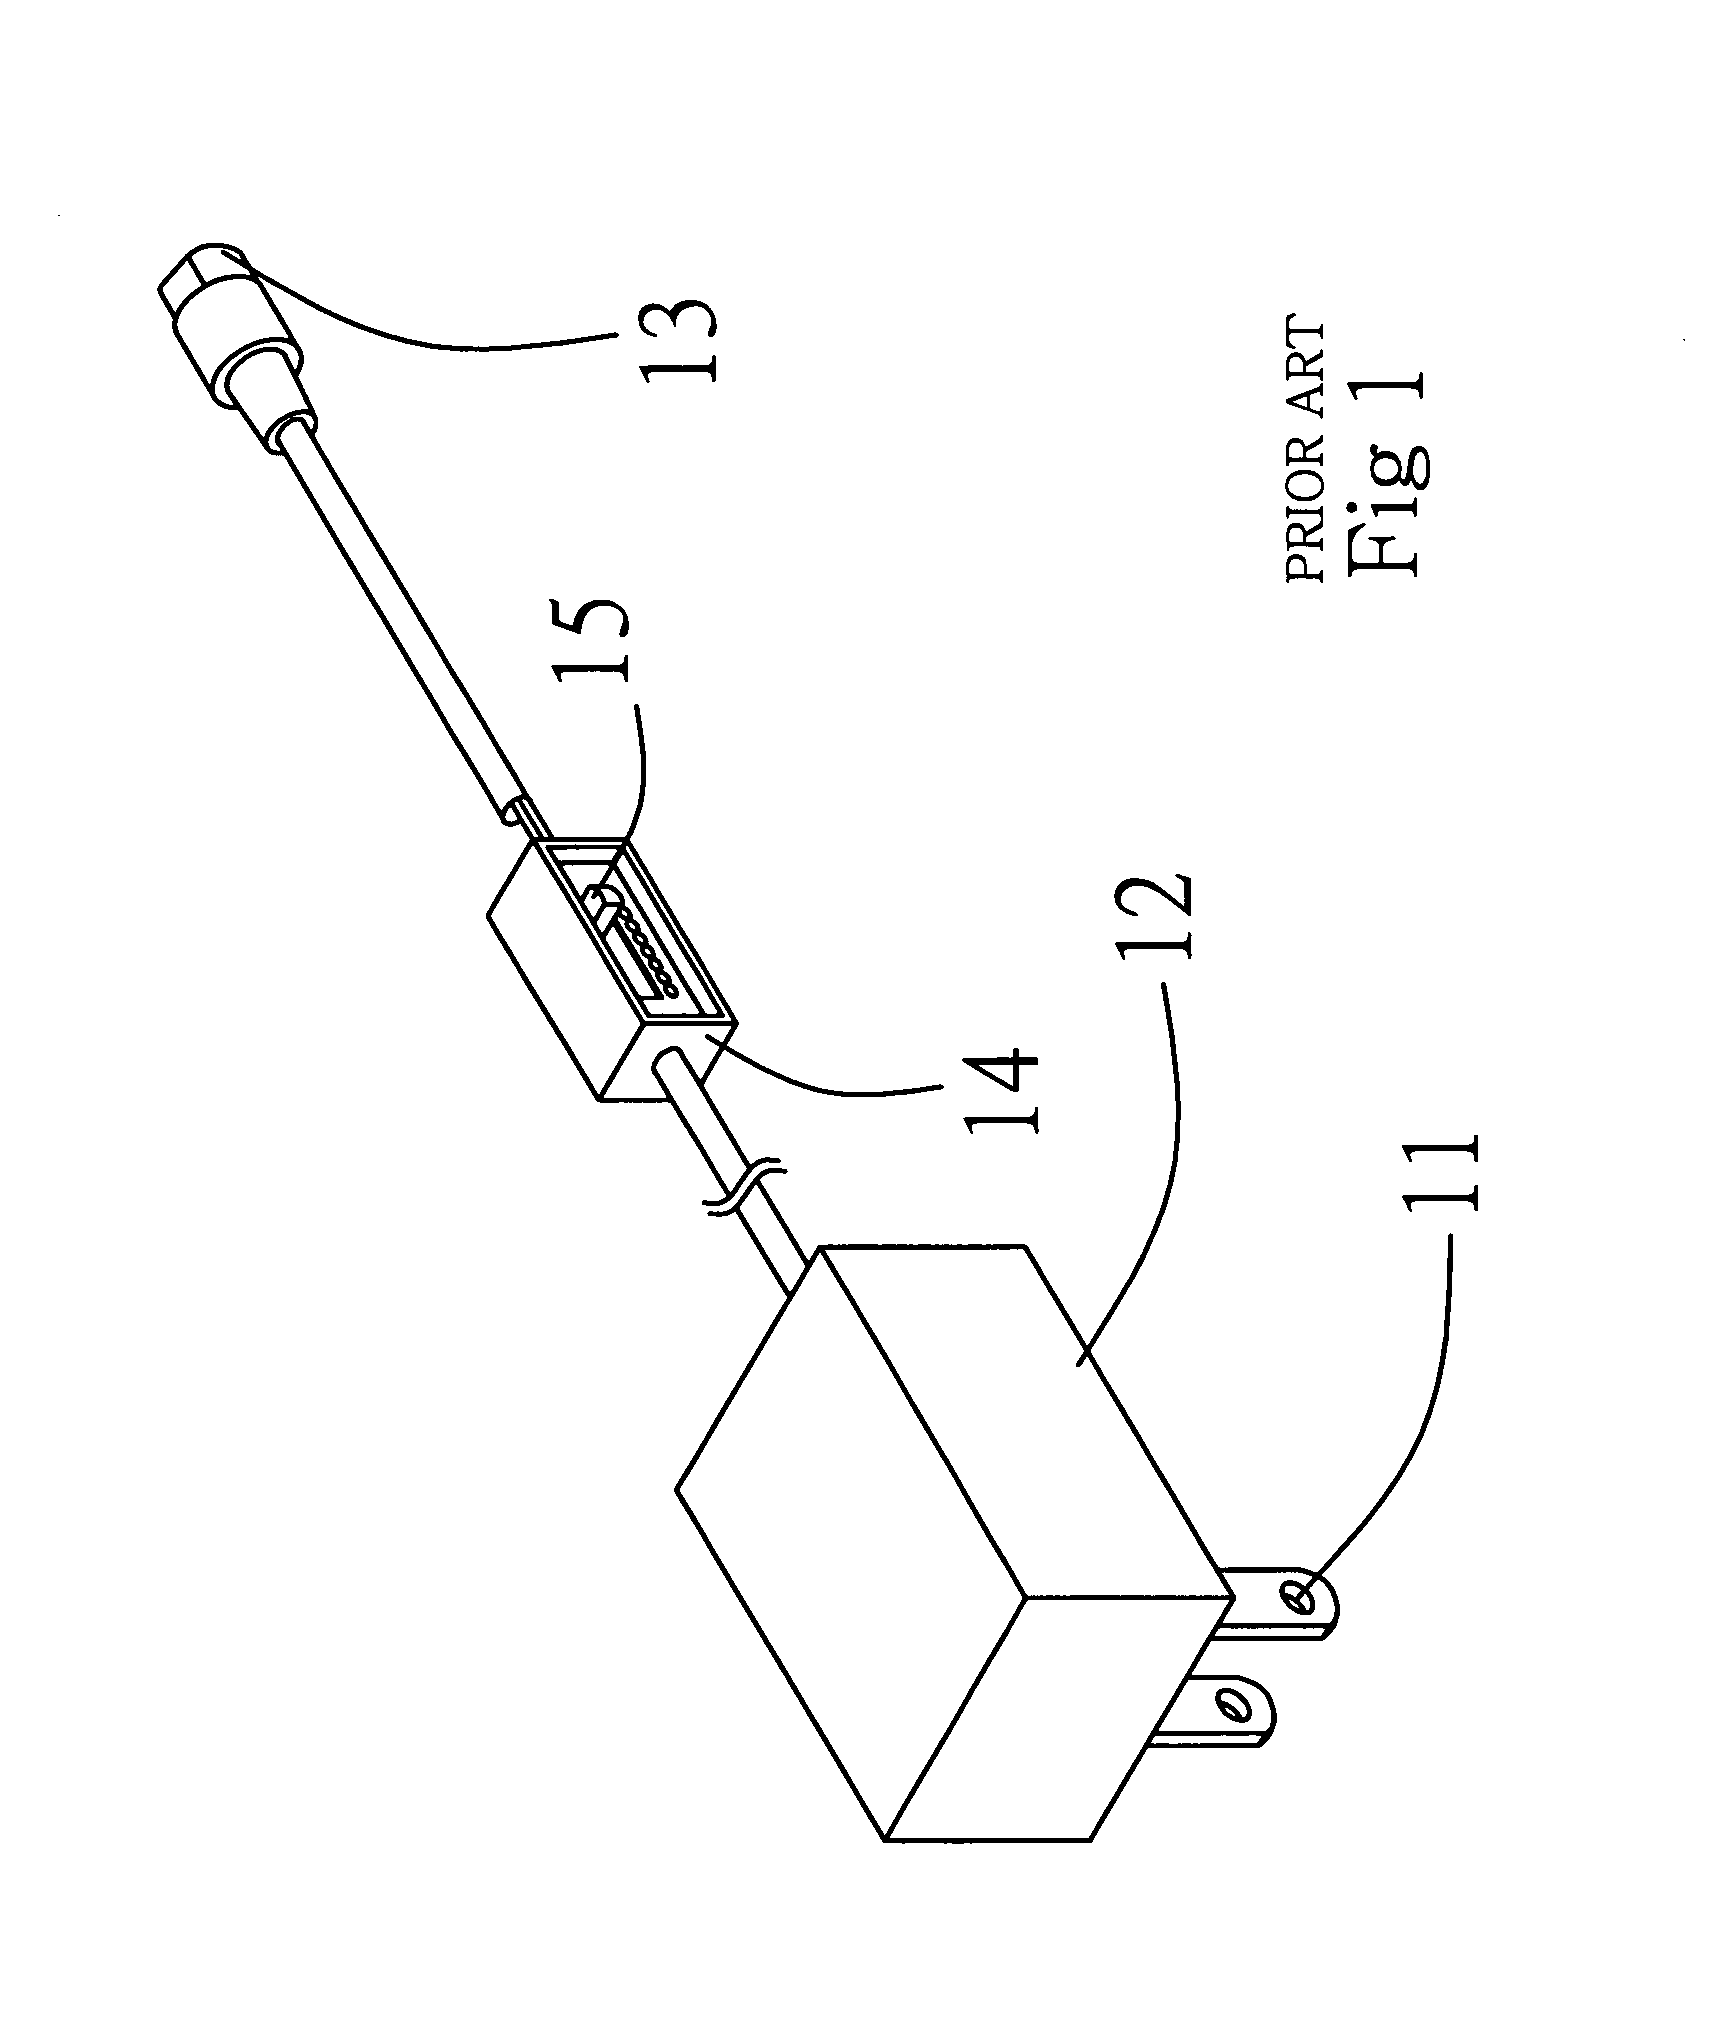 Voltage transformer with sequentially switchable voltage selection circuit